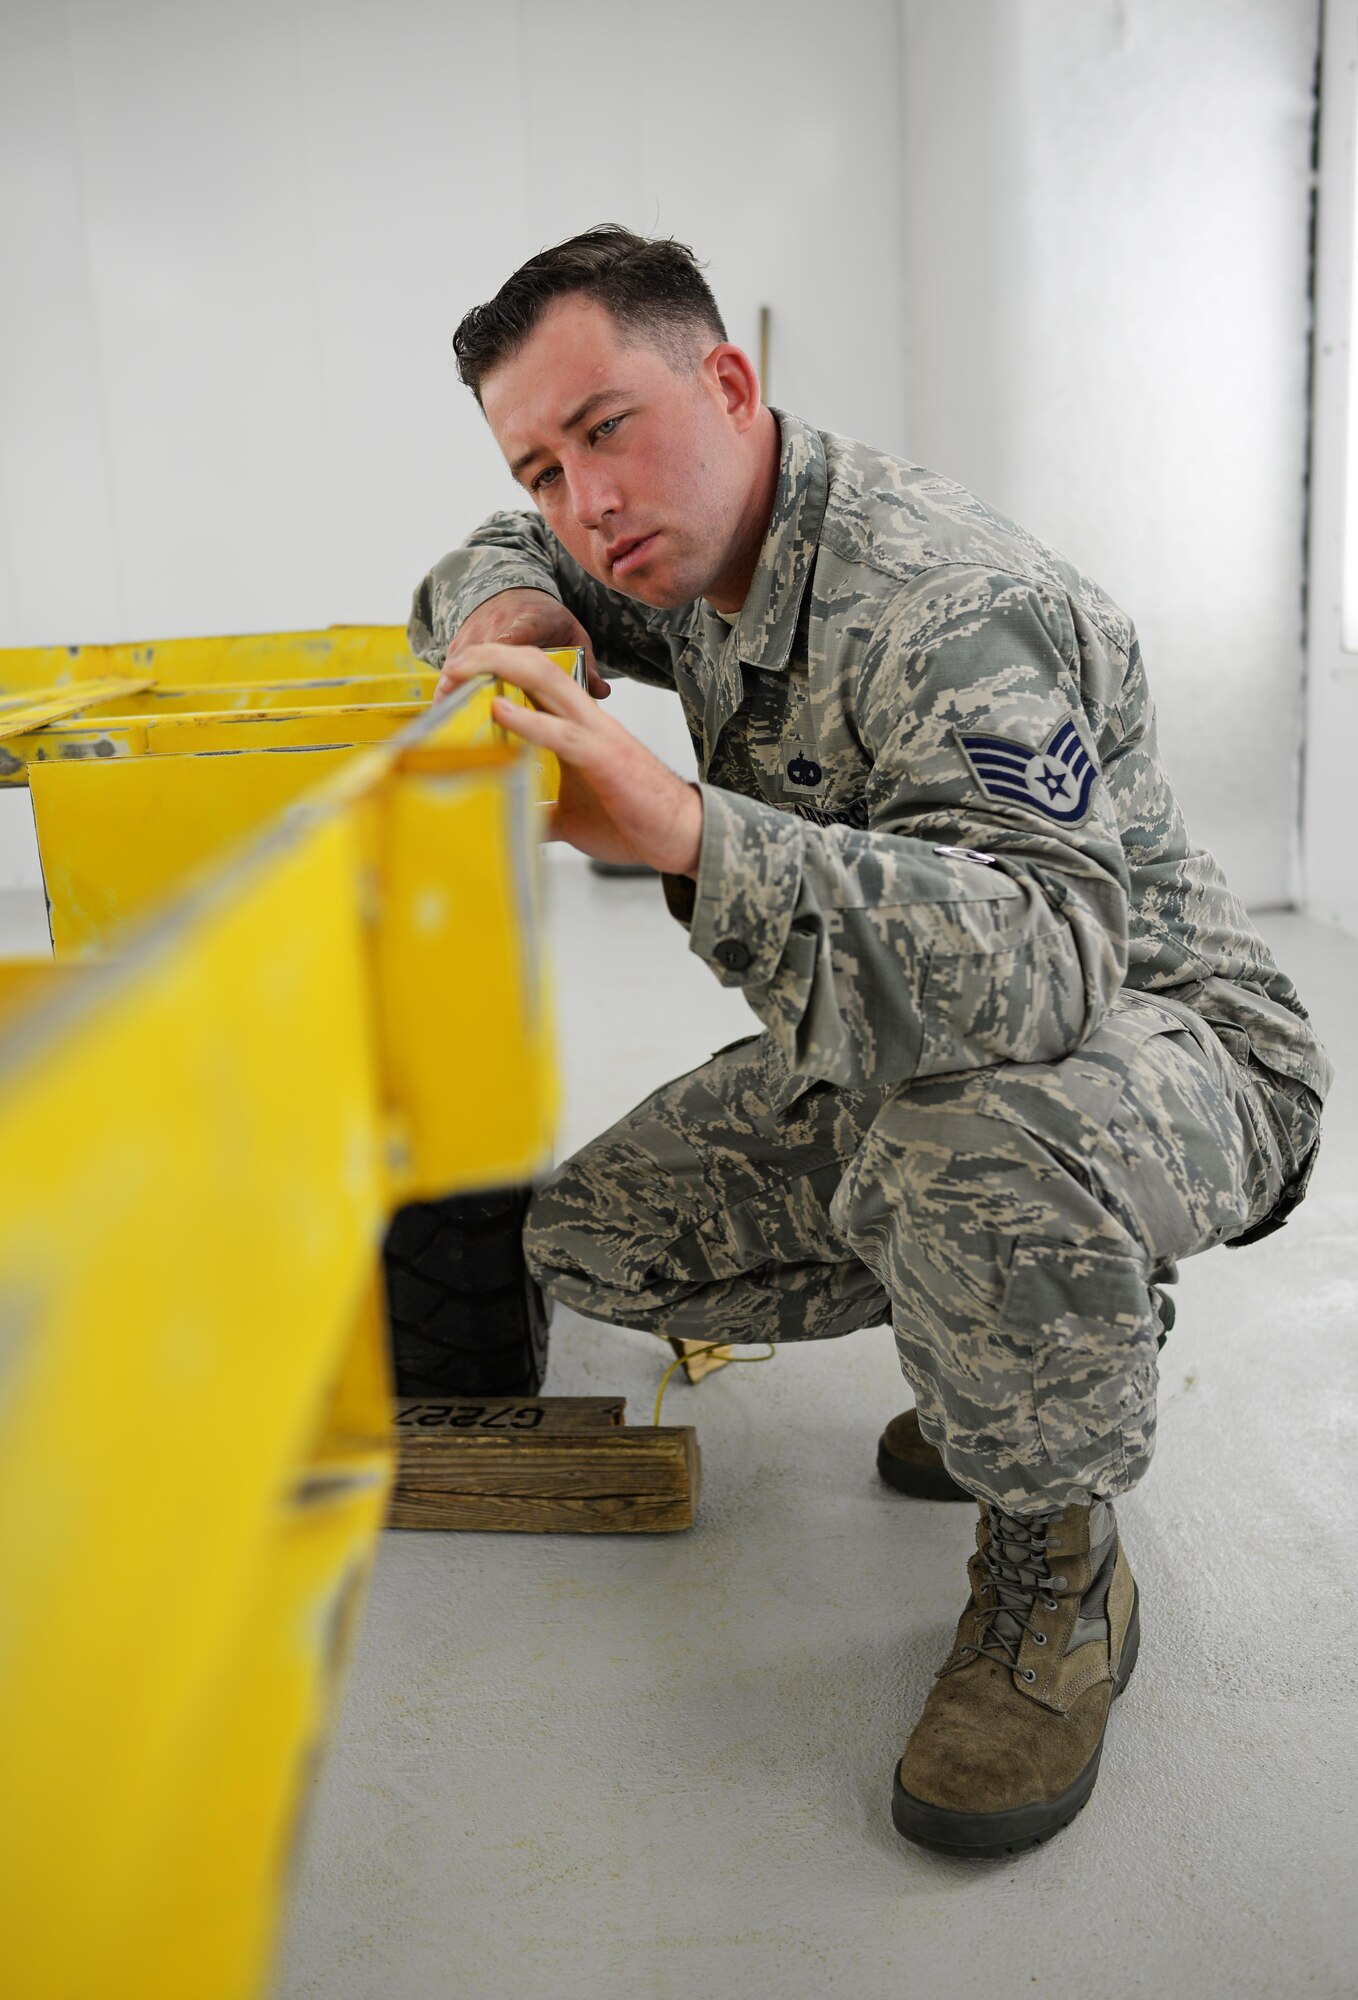 U.S. Air Force Staff Sgt. Brendan McCormick, 36th Maintenance Squadron corrosion control NCO in charge, inspects a weapons trailer June 27, 2017, at Andersen Air Force Base, Guam. Airmen began work in Andersen’s new temporary corrosion control facility June 5th. (U.S. Air Force photo by Senior Airman Alexa Ann Henderson)